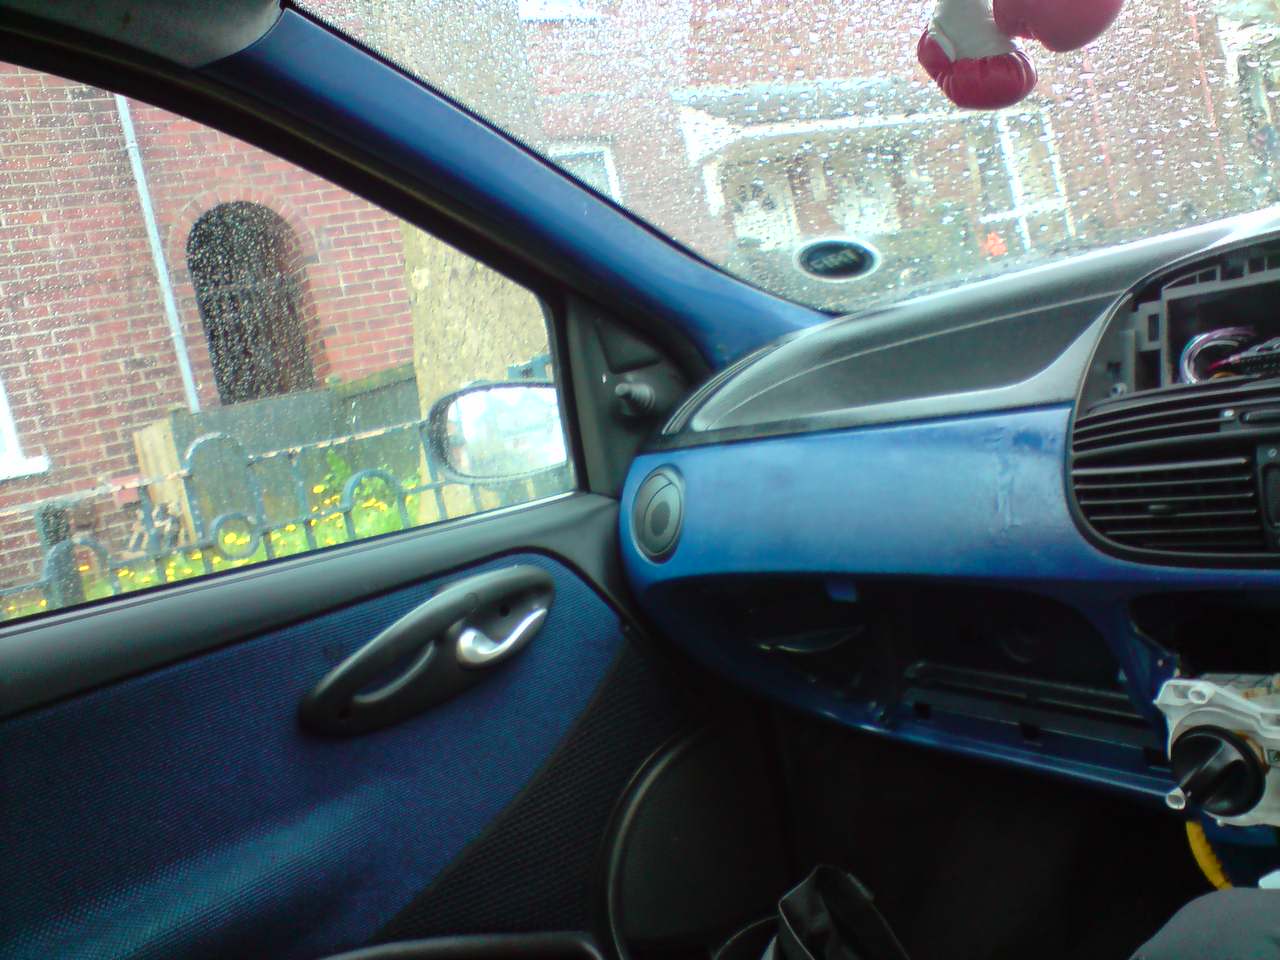 sneak peek of dash (everything been sprayed just not everything fitted)